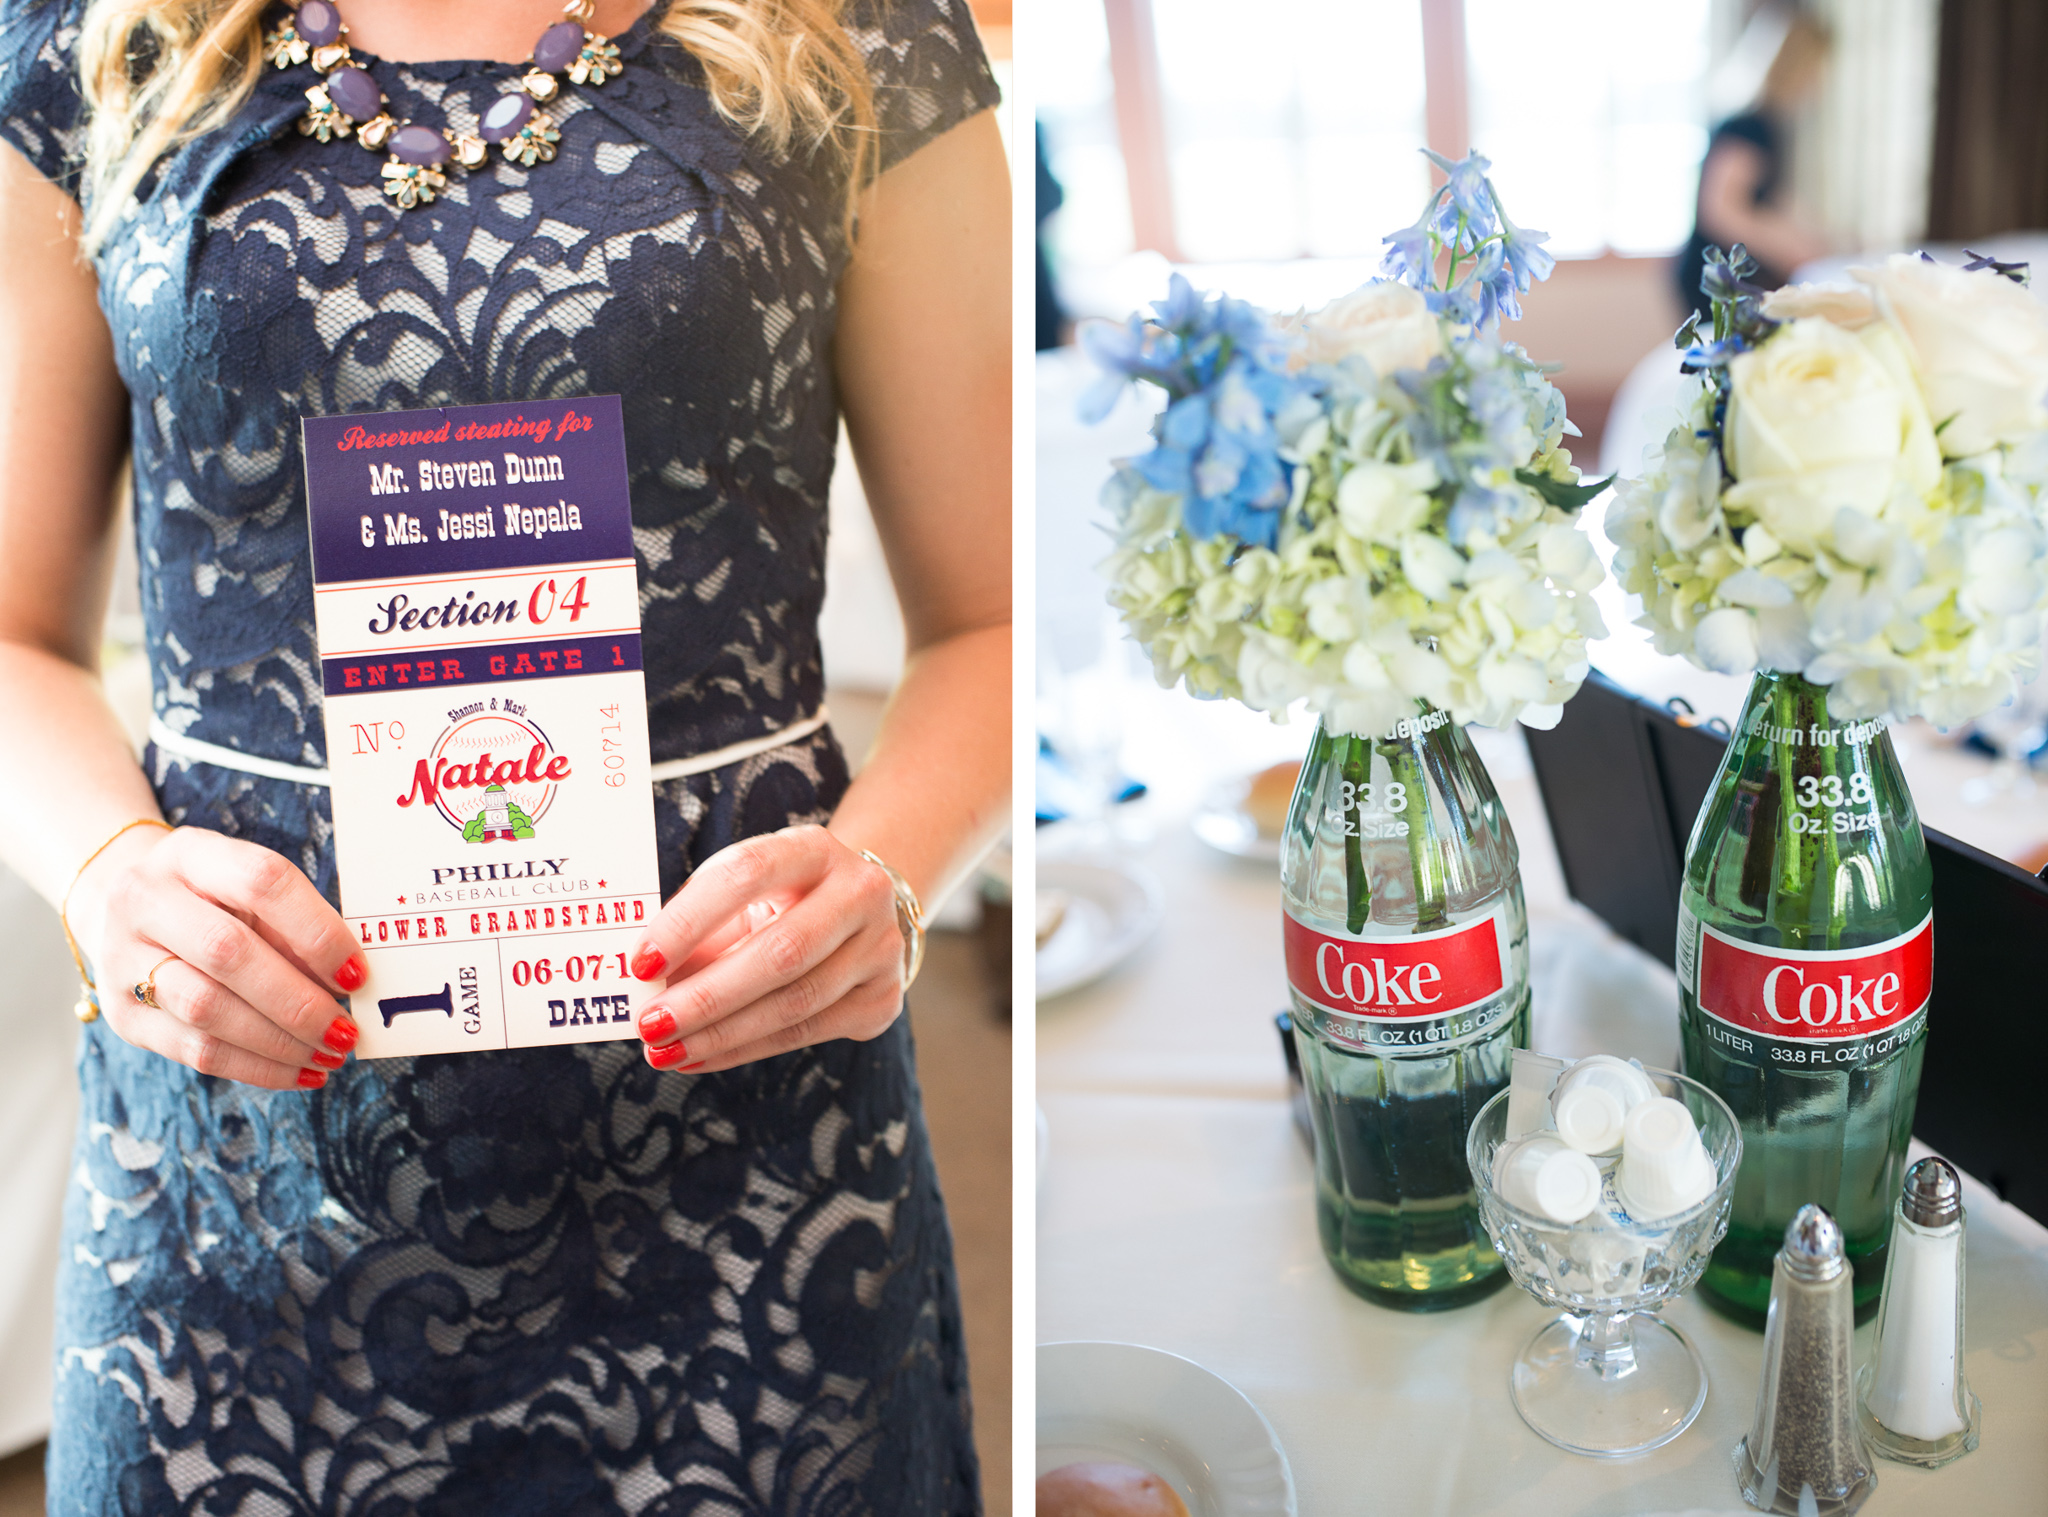 Baseball Themed Wedding Placecards Tickets - Coke Bottle Centerpieces photo